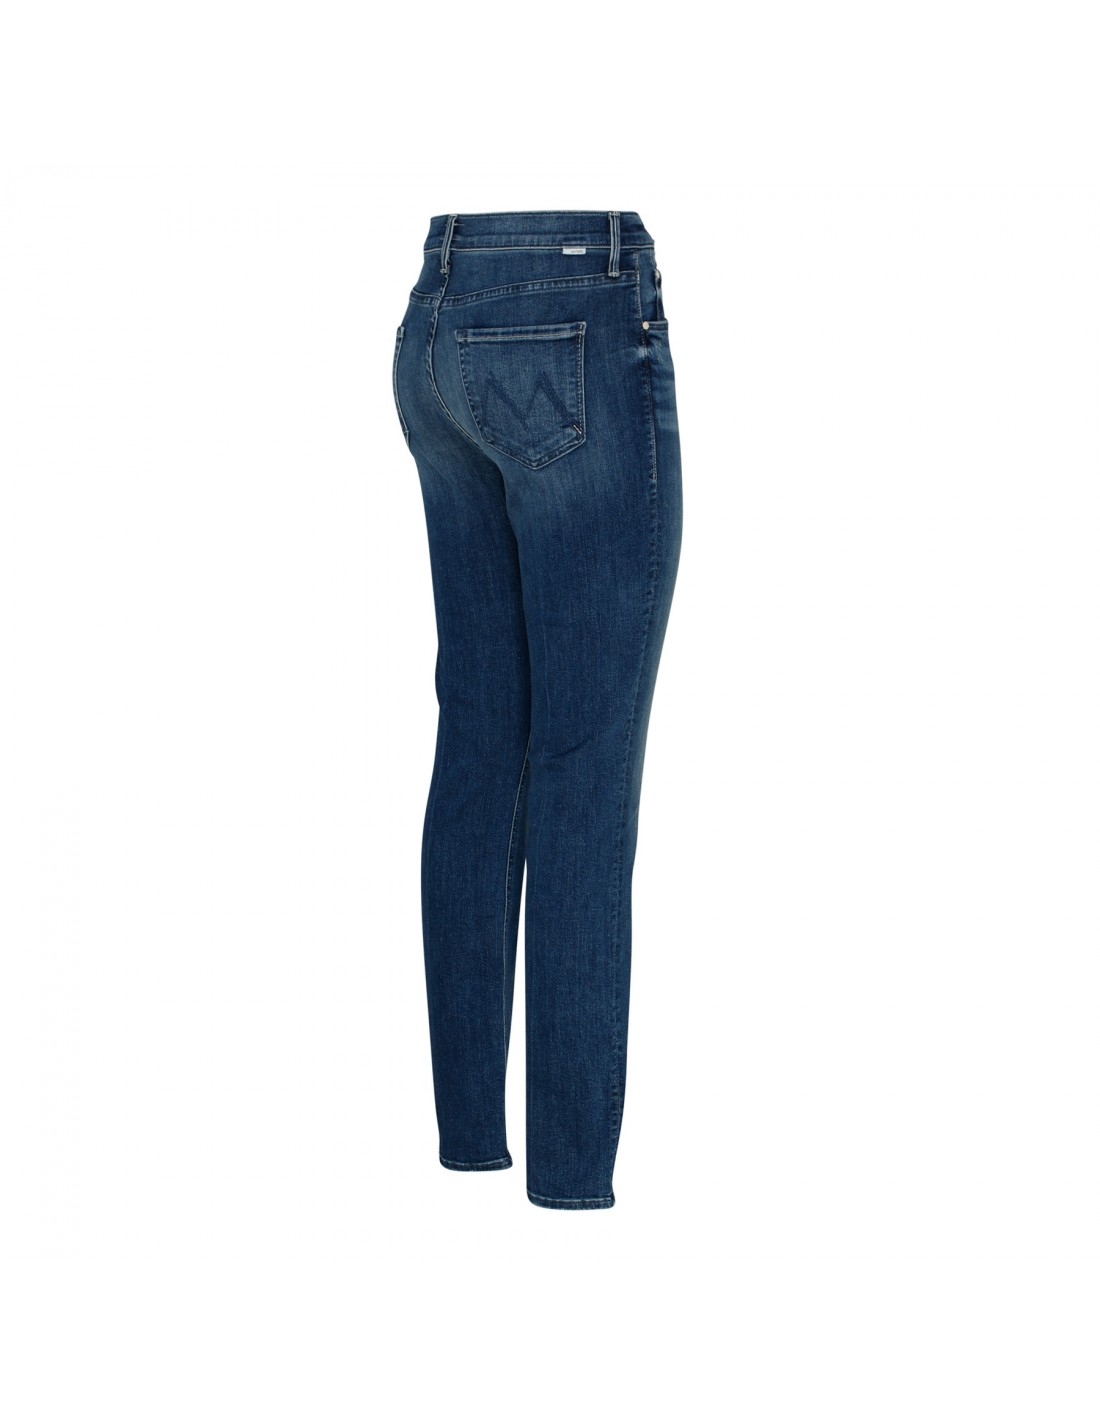 The Dazzler Hover jeans